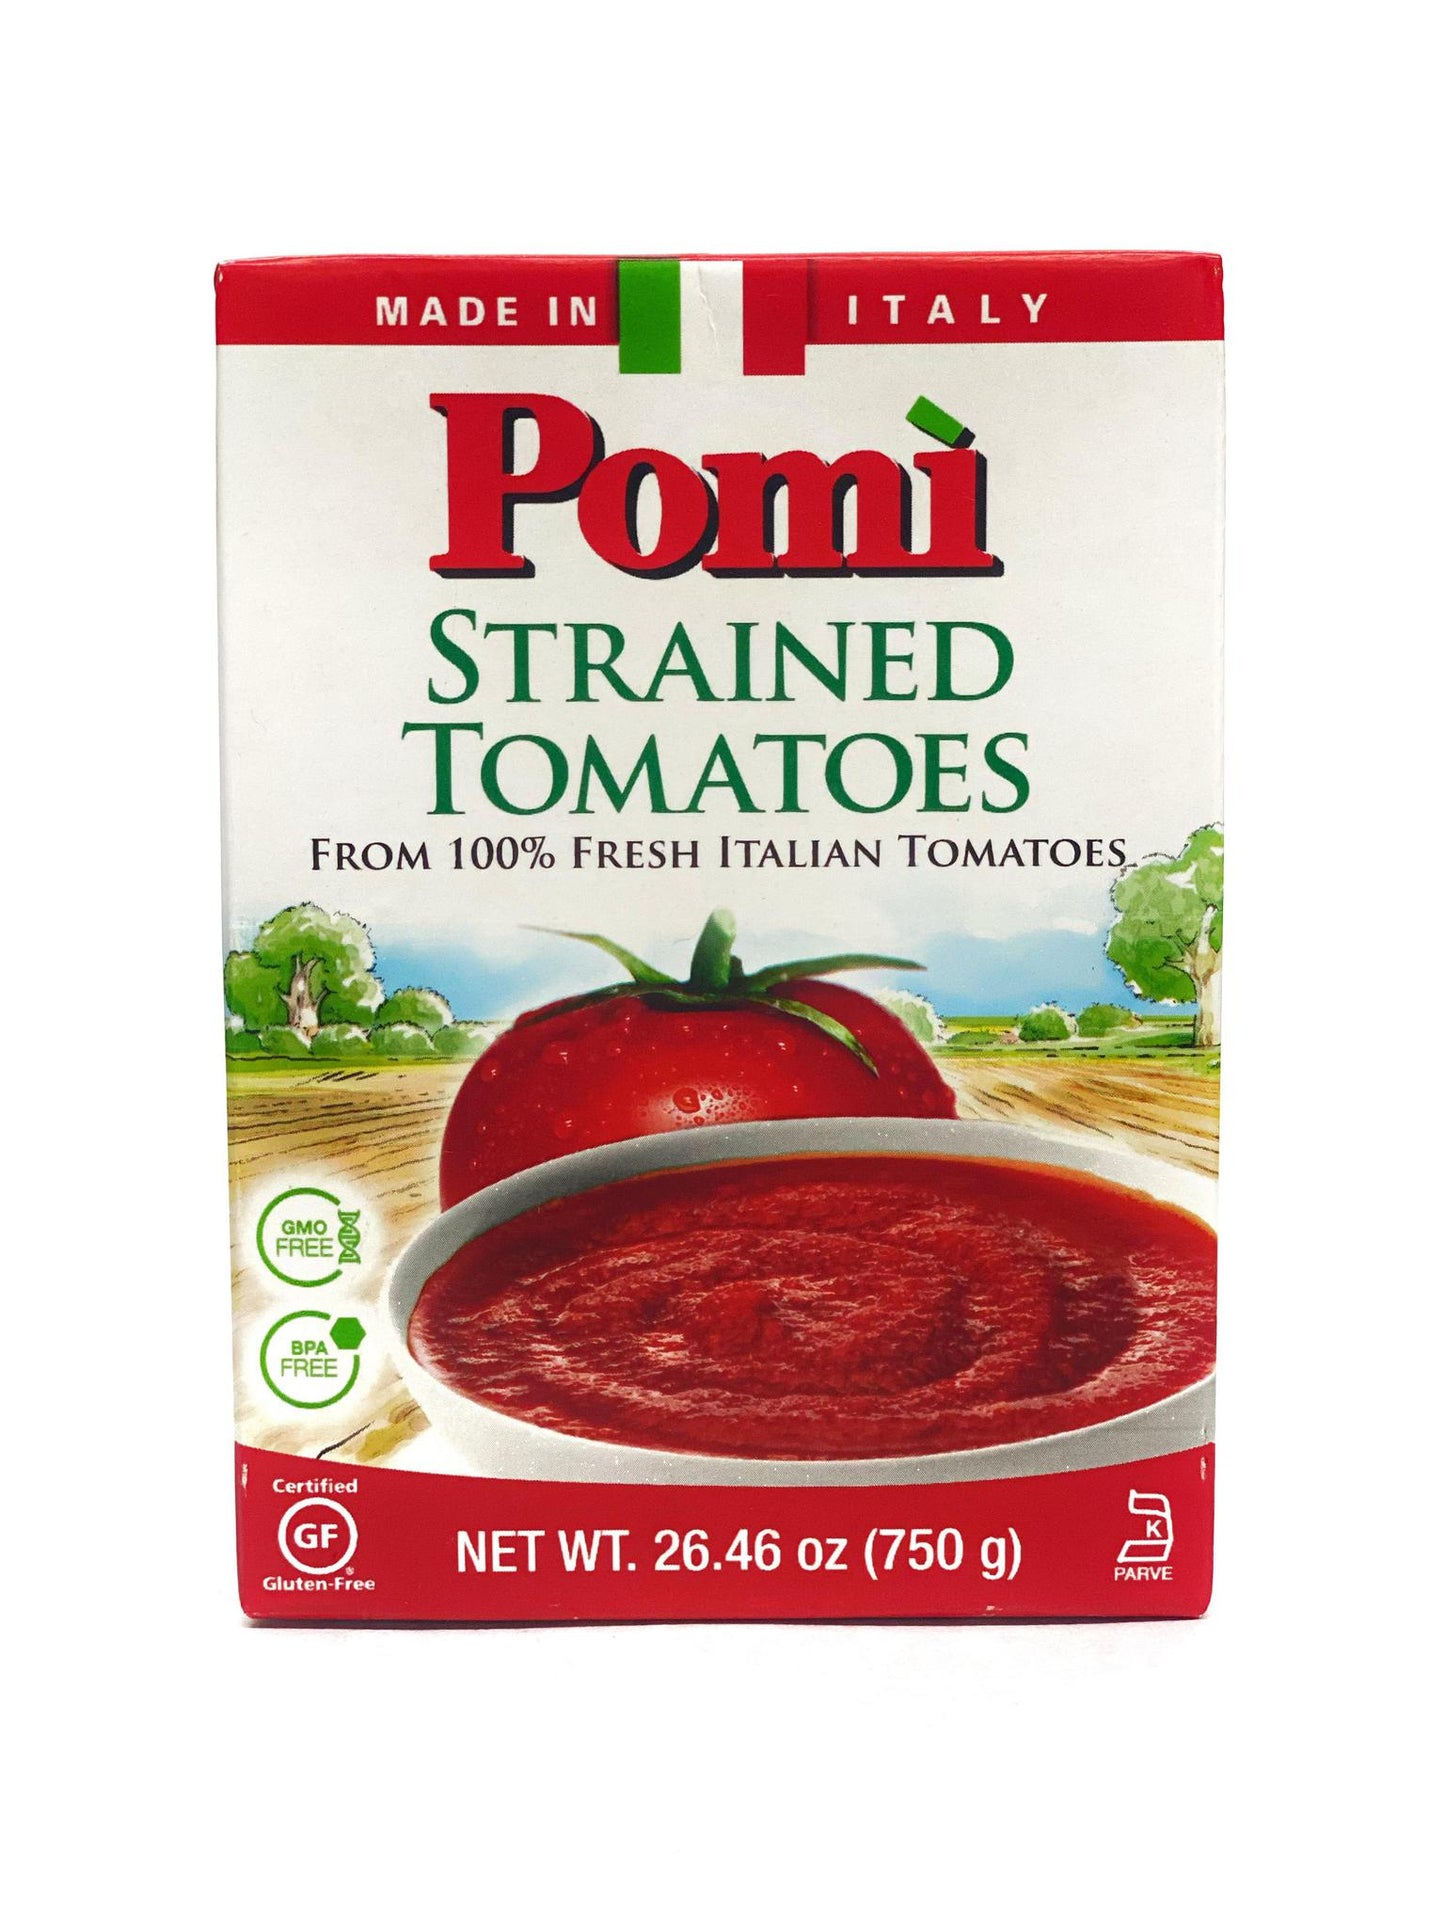 Pomi Strained Tomatoes, 26.46 oz